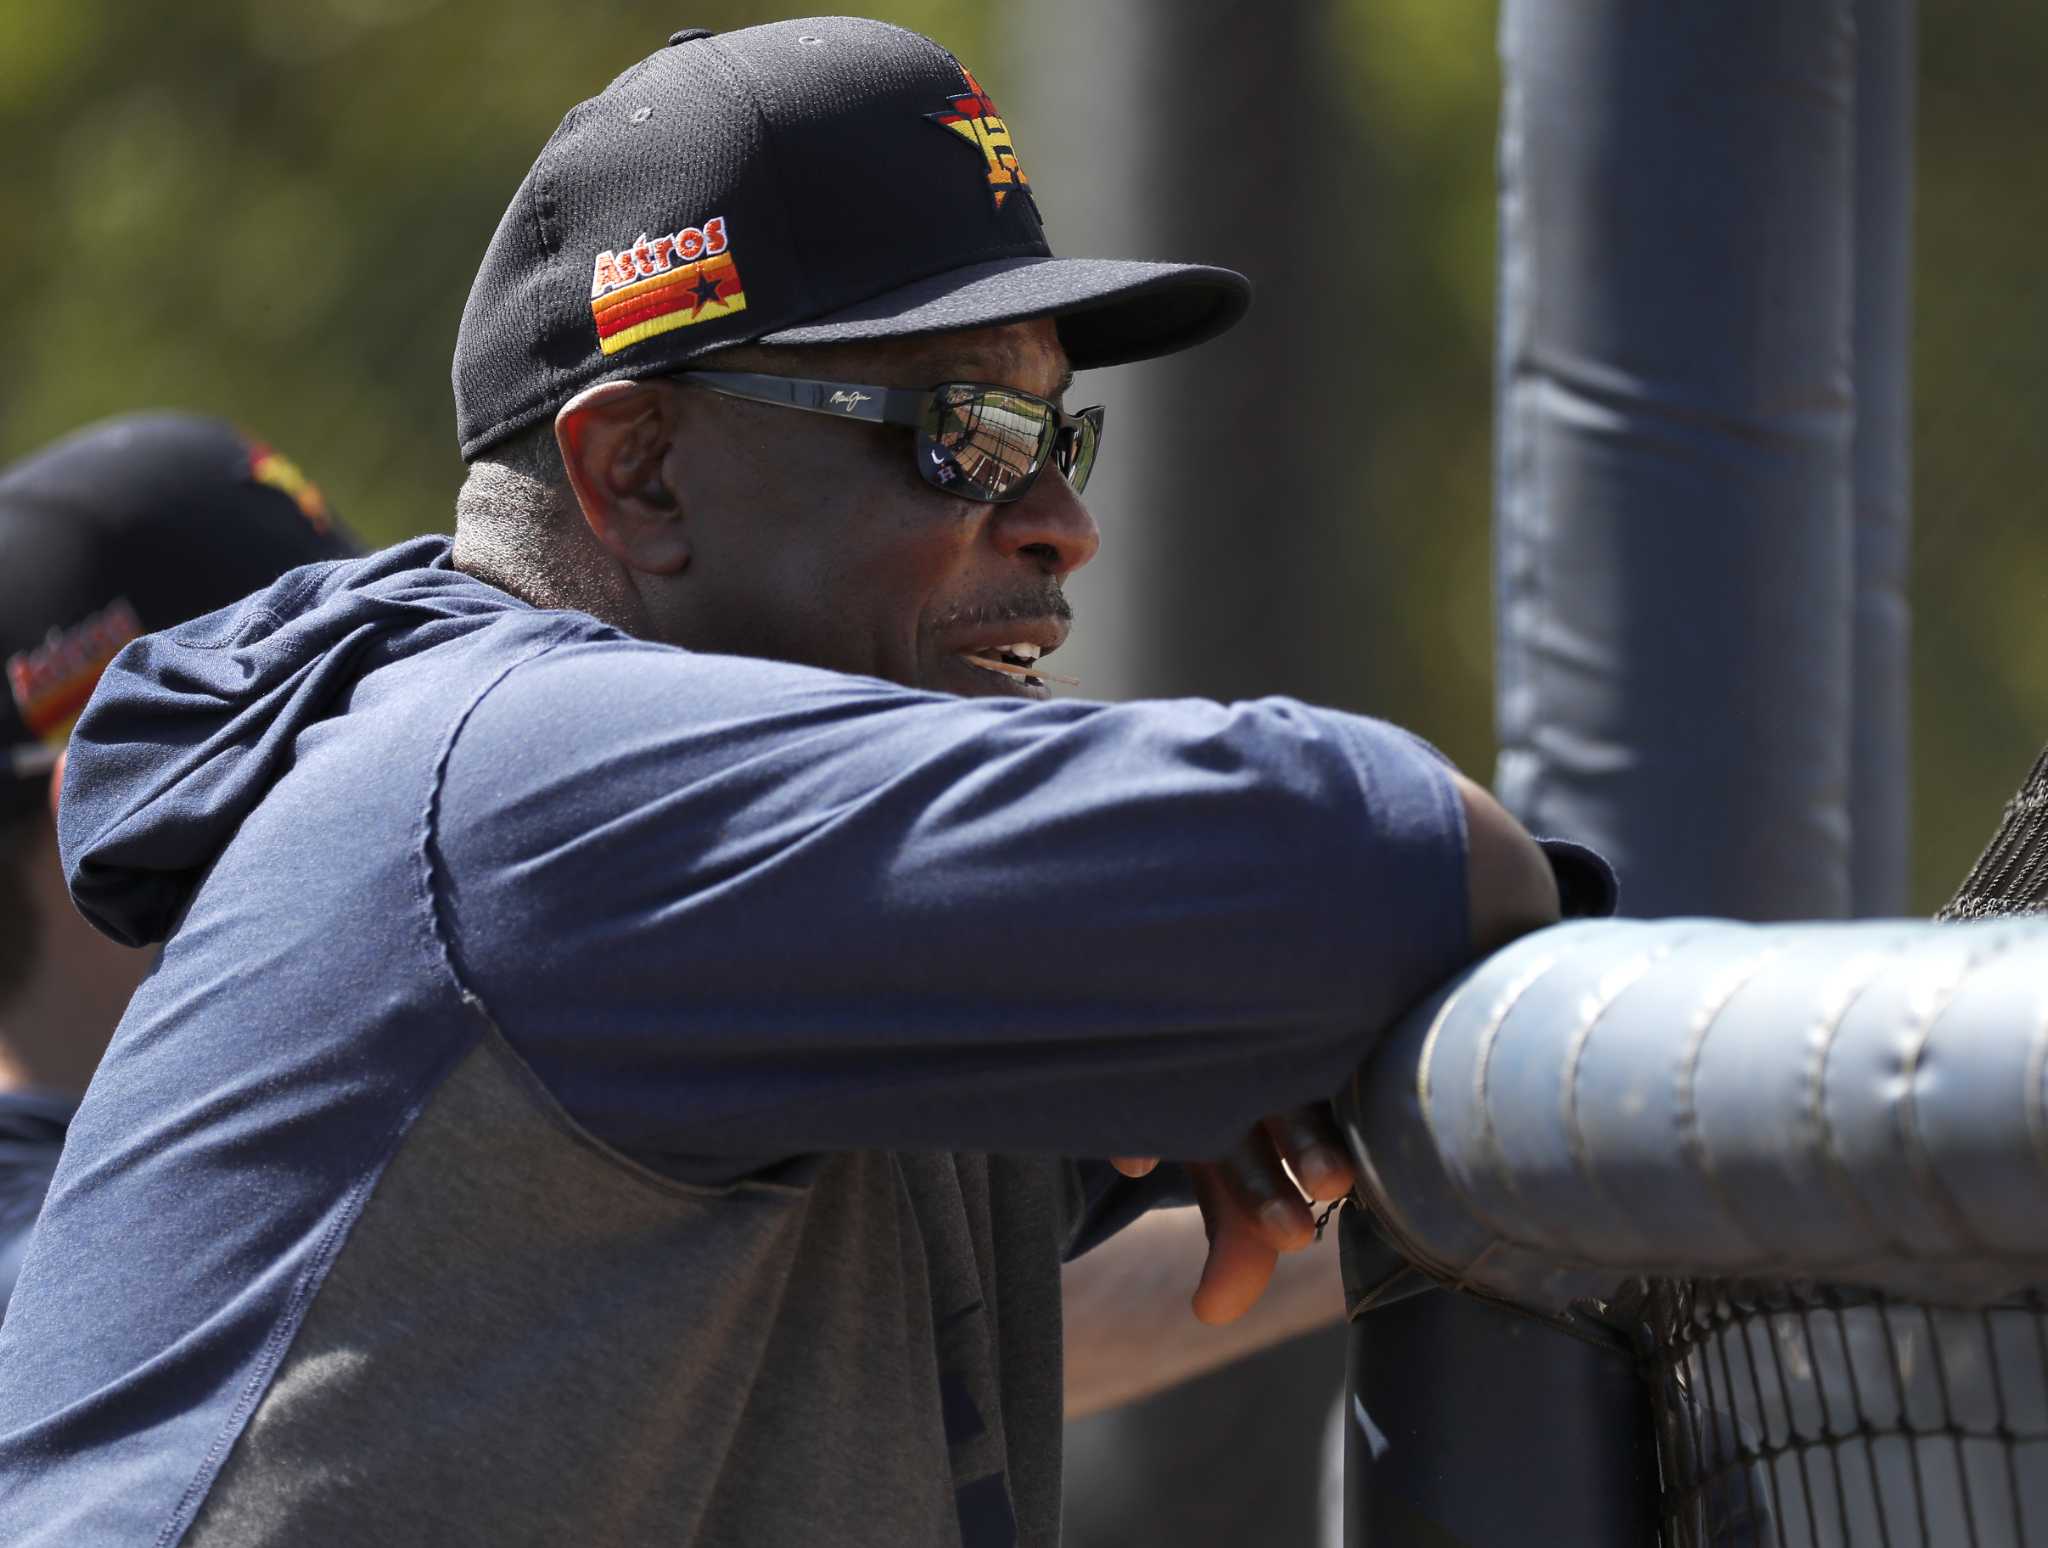 Sunday's series finale vs. A's a family affair for Astros' Dusty Baker